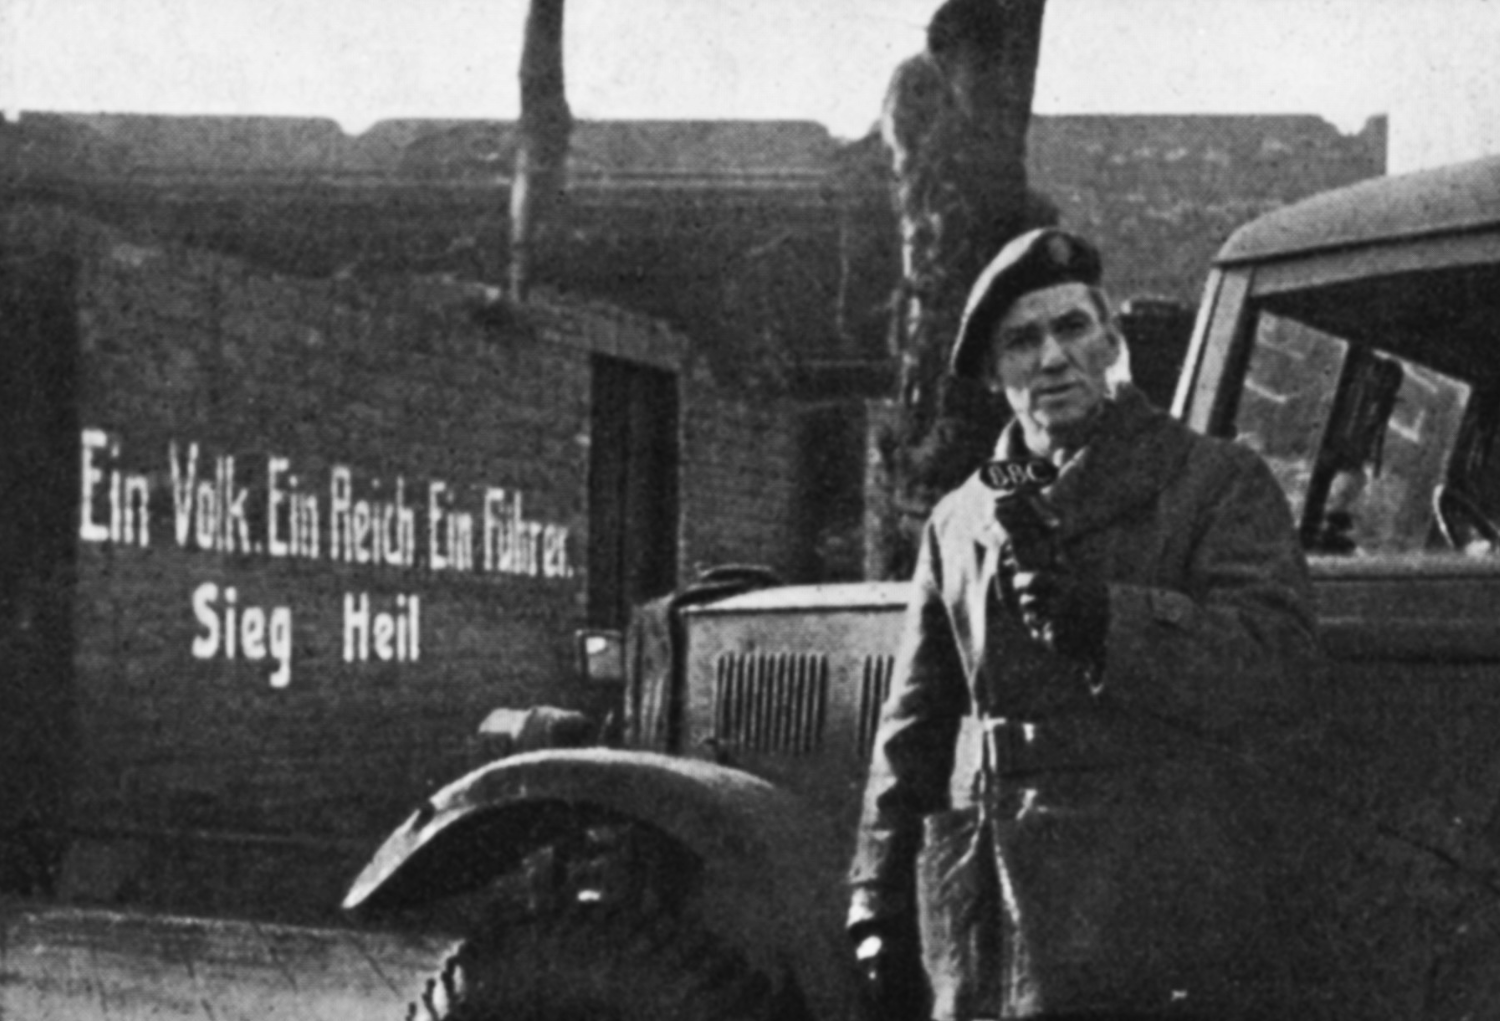 A man stands in front of a wall with Nazi slogans written on it